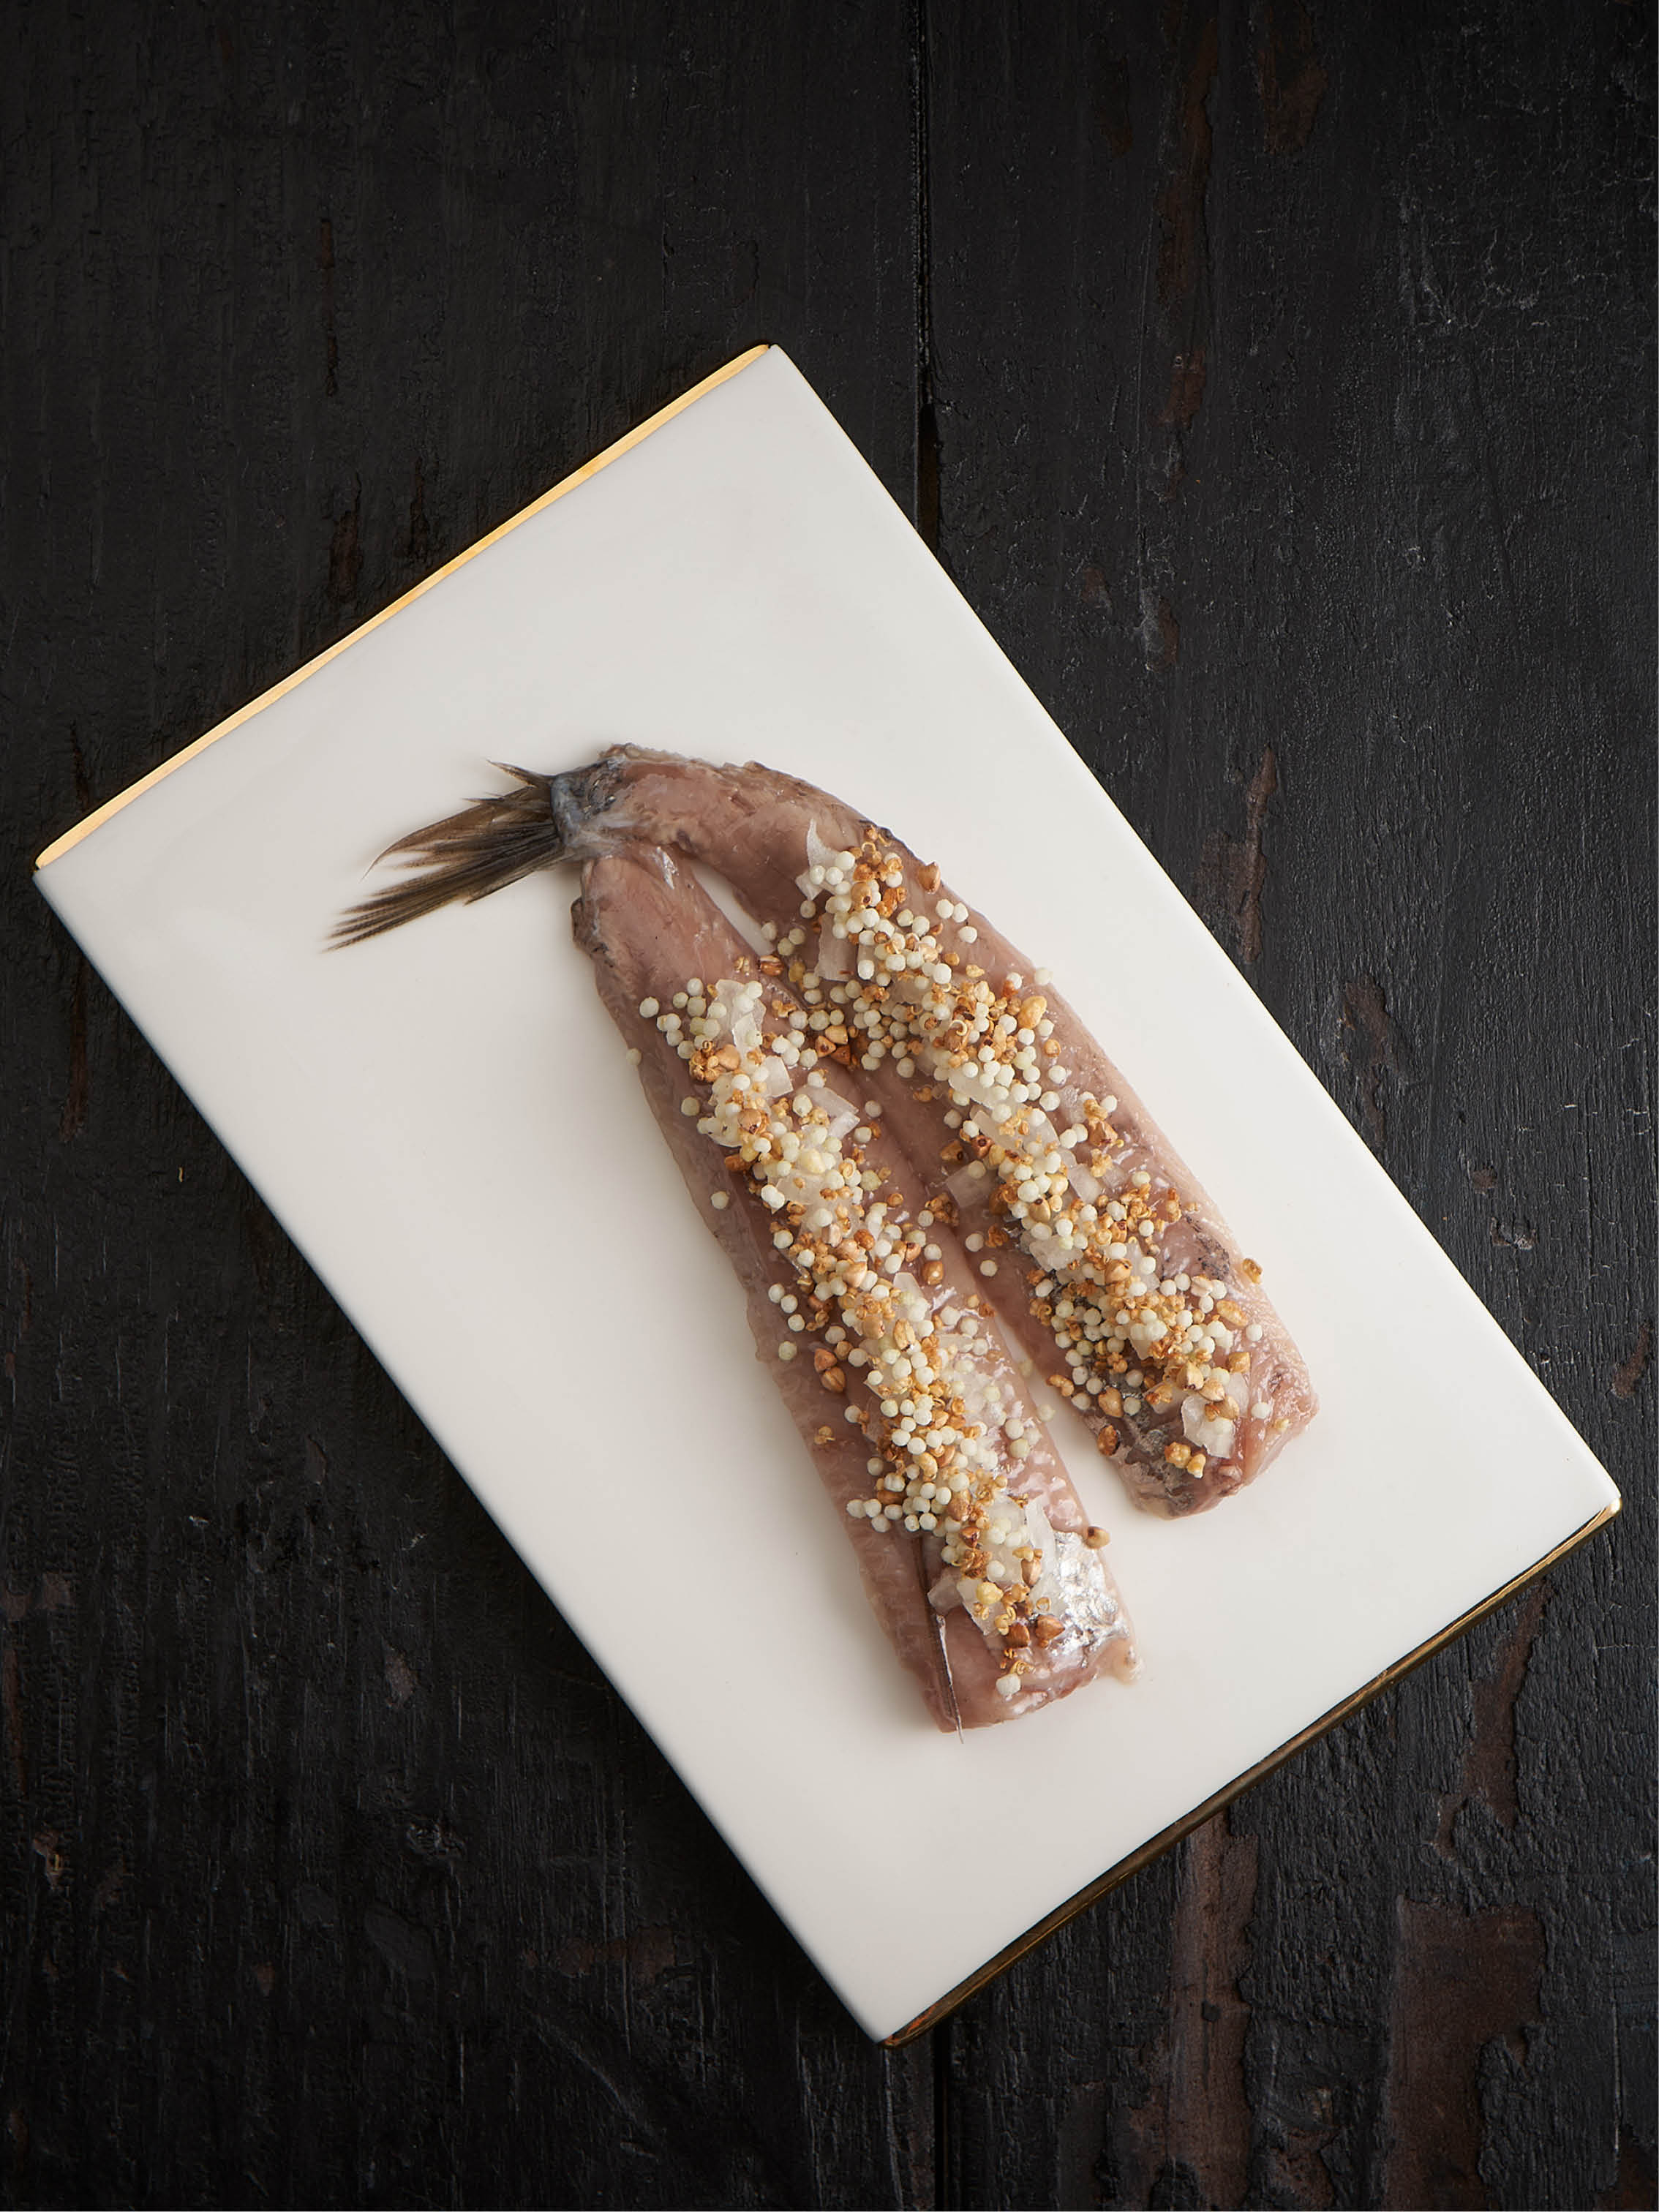 Marinated herring with Rice Crispies and Crunchy Grains